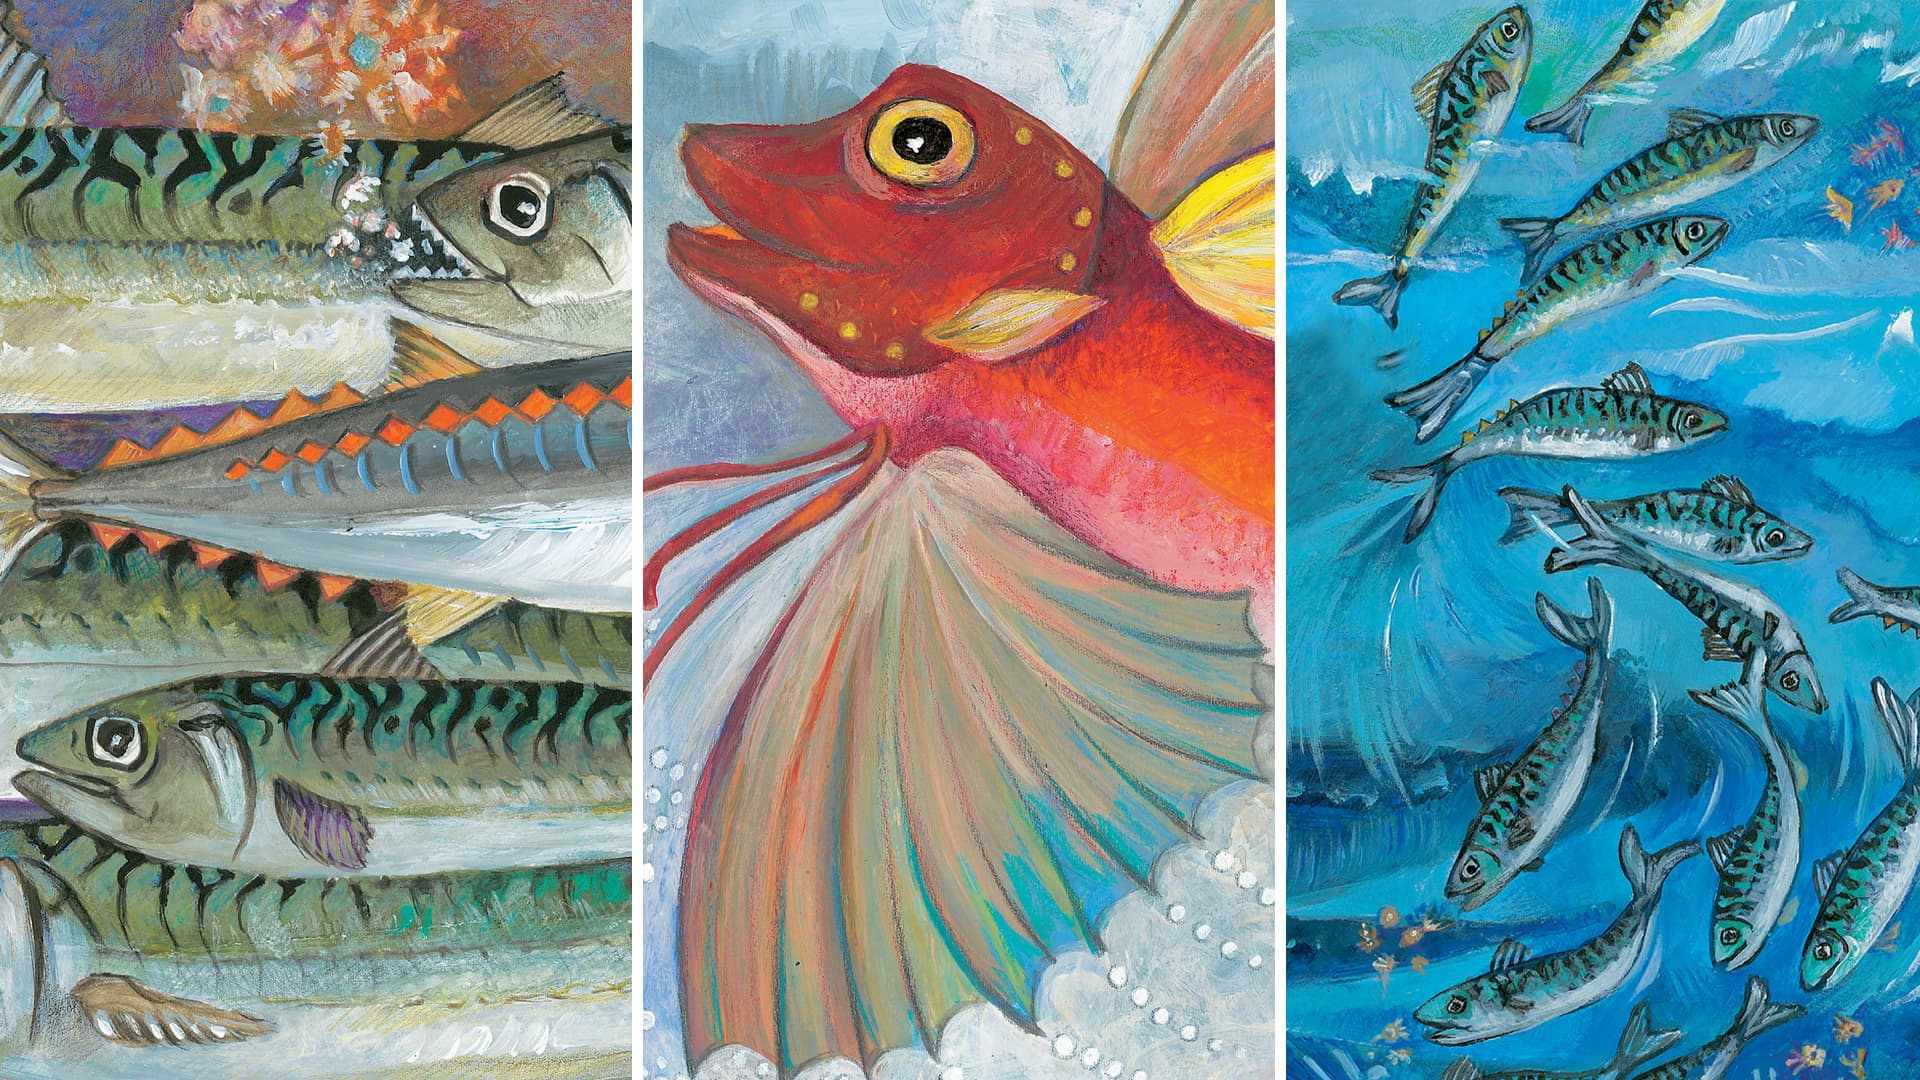 Illustrations from the Simmering the Sea cookbook. Art by Lea Tirmant-Desoyen